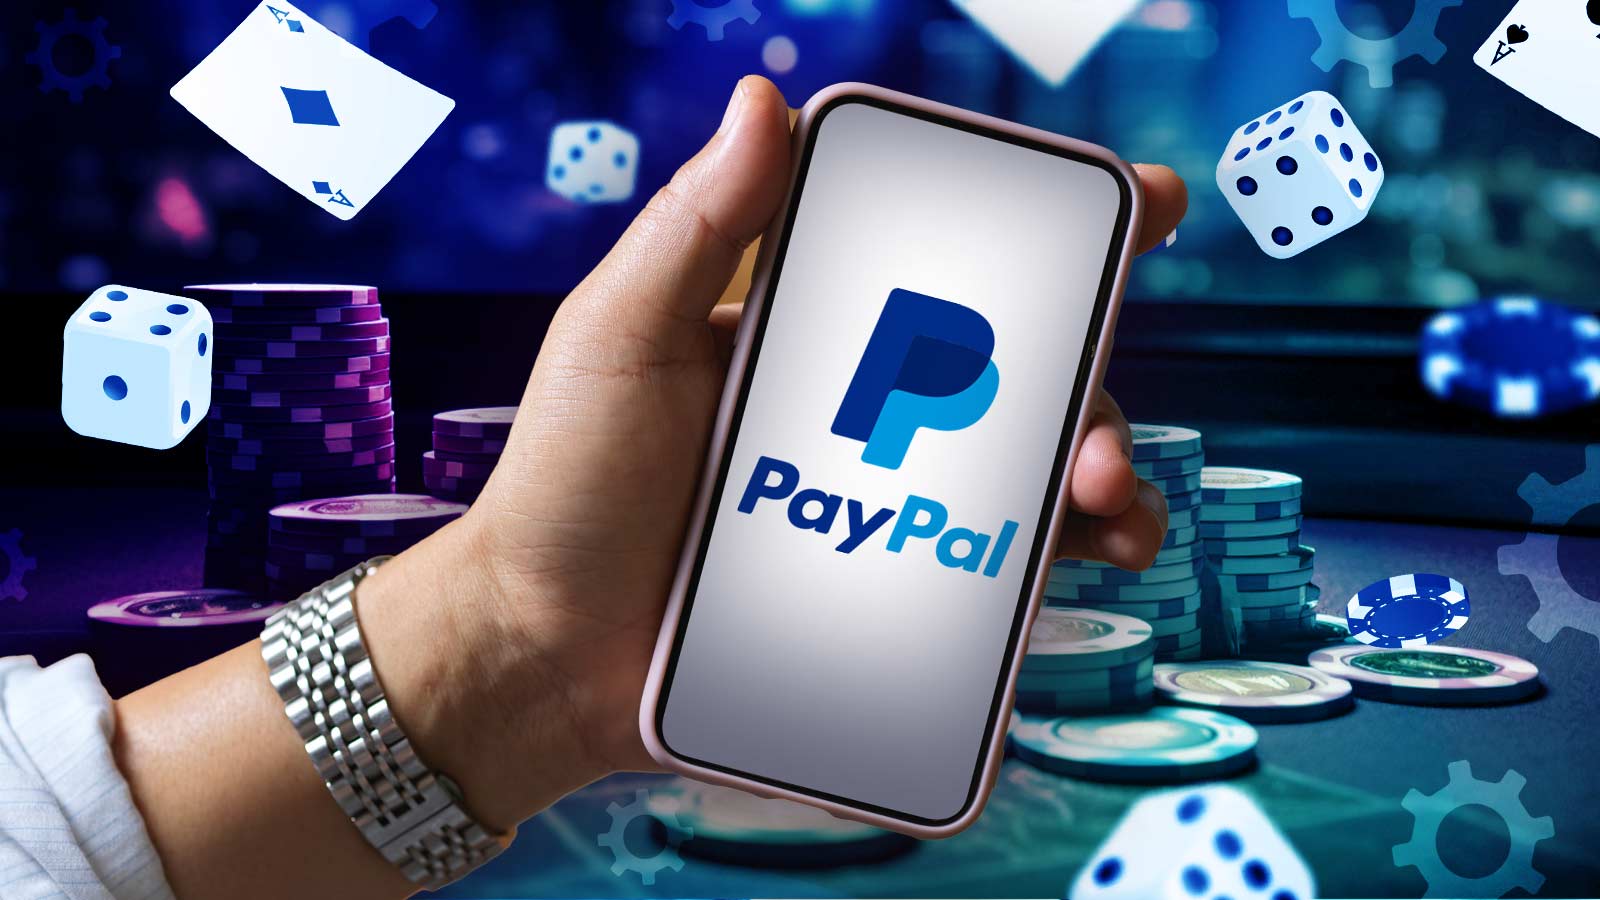 PayPal Analysis- In-Depth Look at PayPal